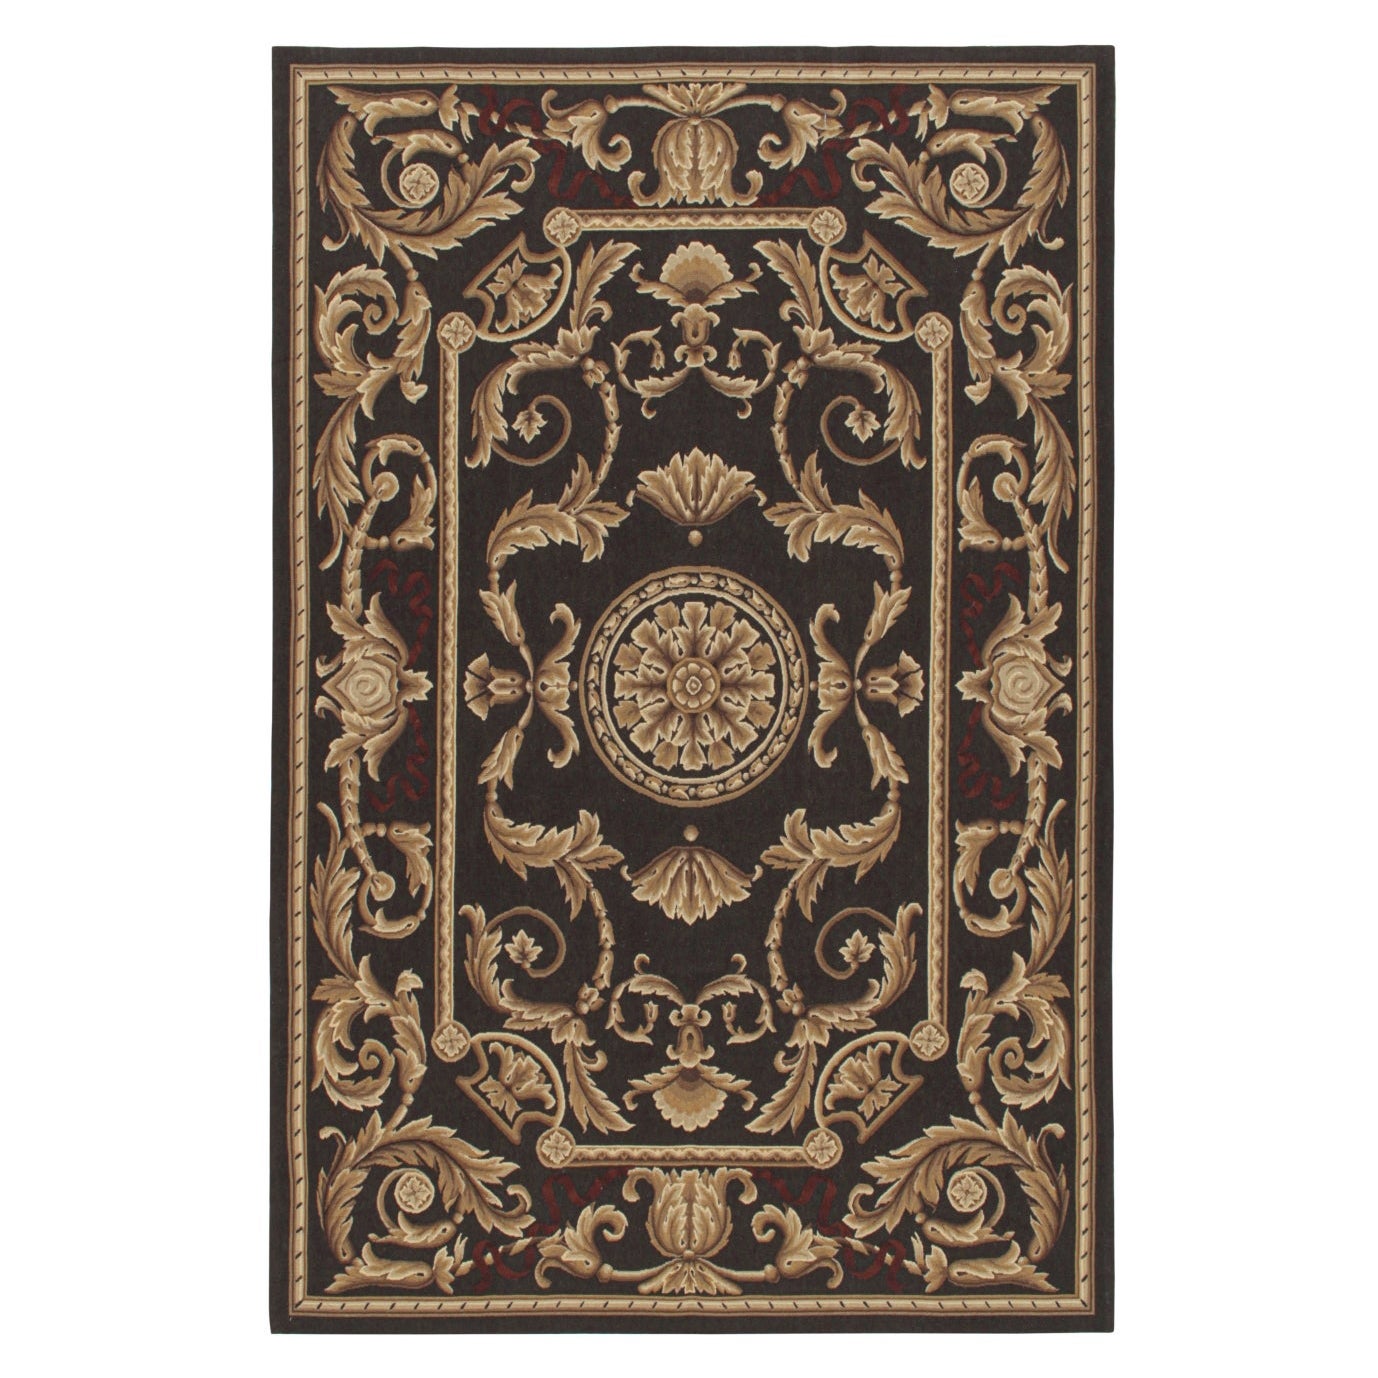 Rug & Kilim’s Aubusson Style Flatweave in Brown with Medallion & Floral Patterns